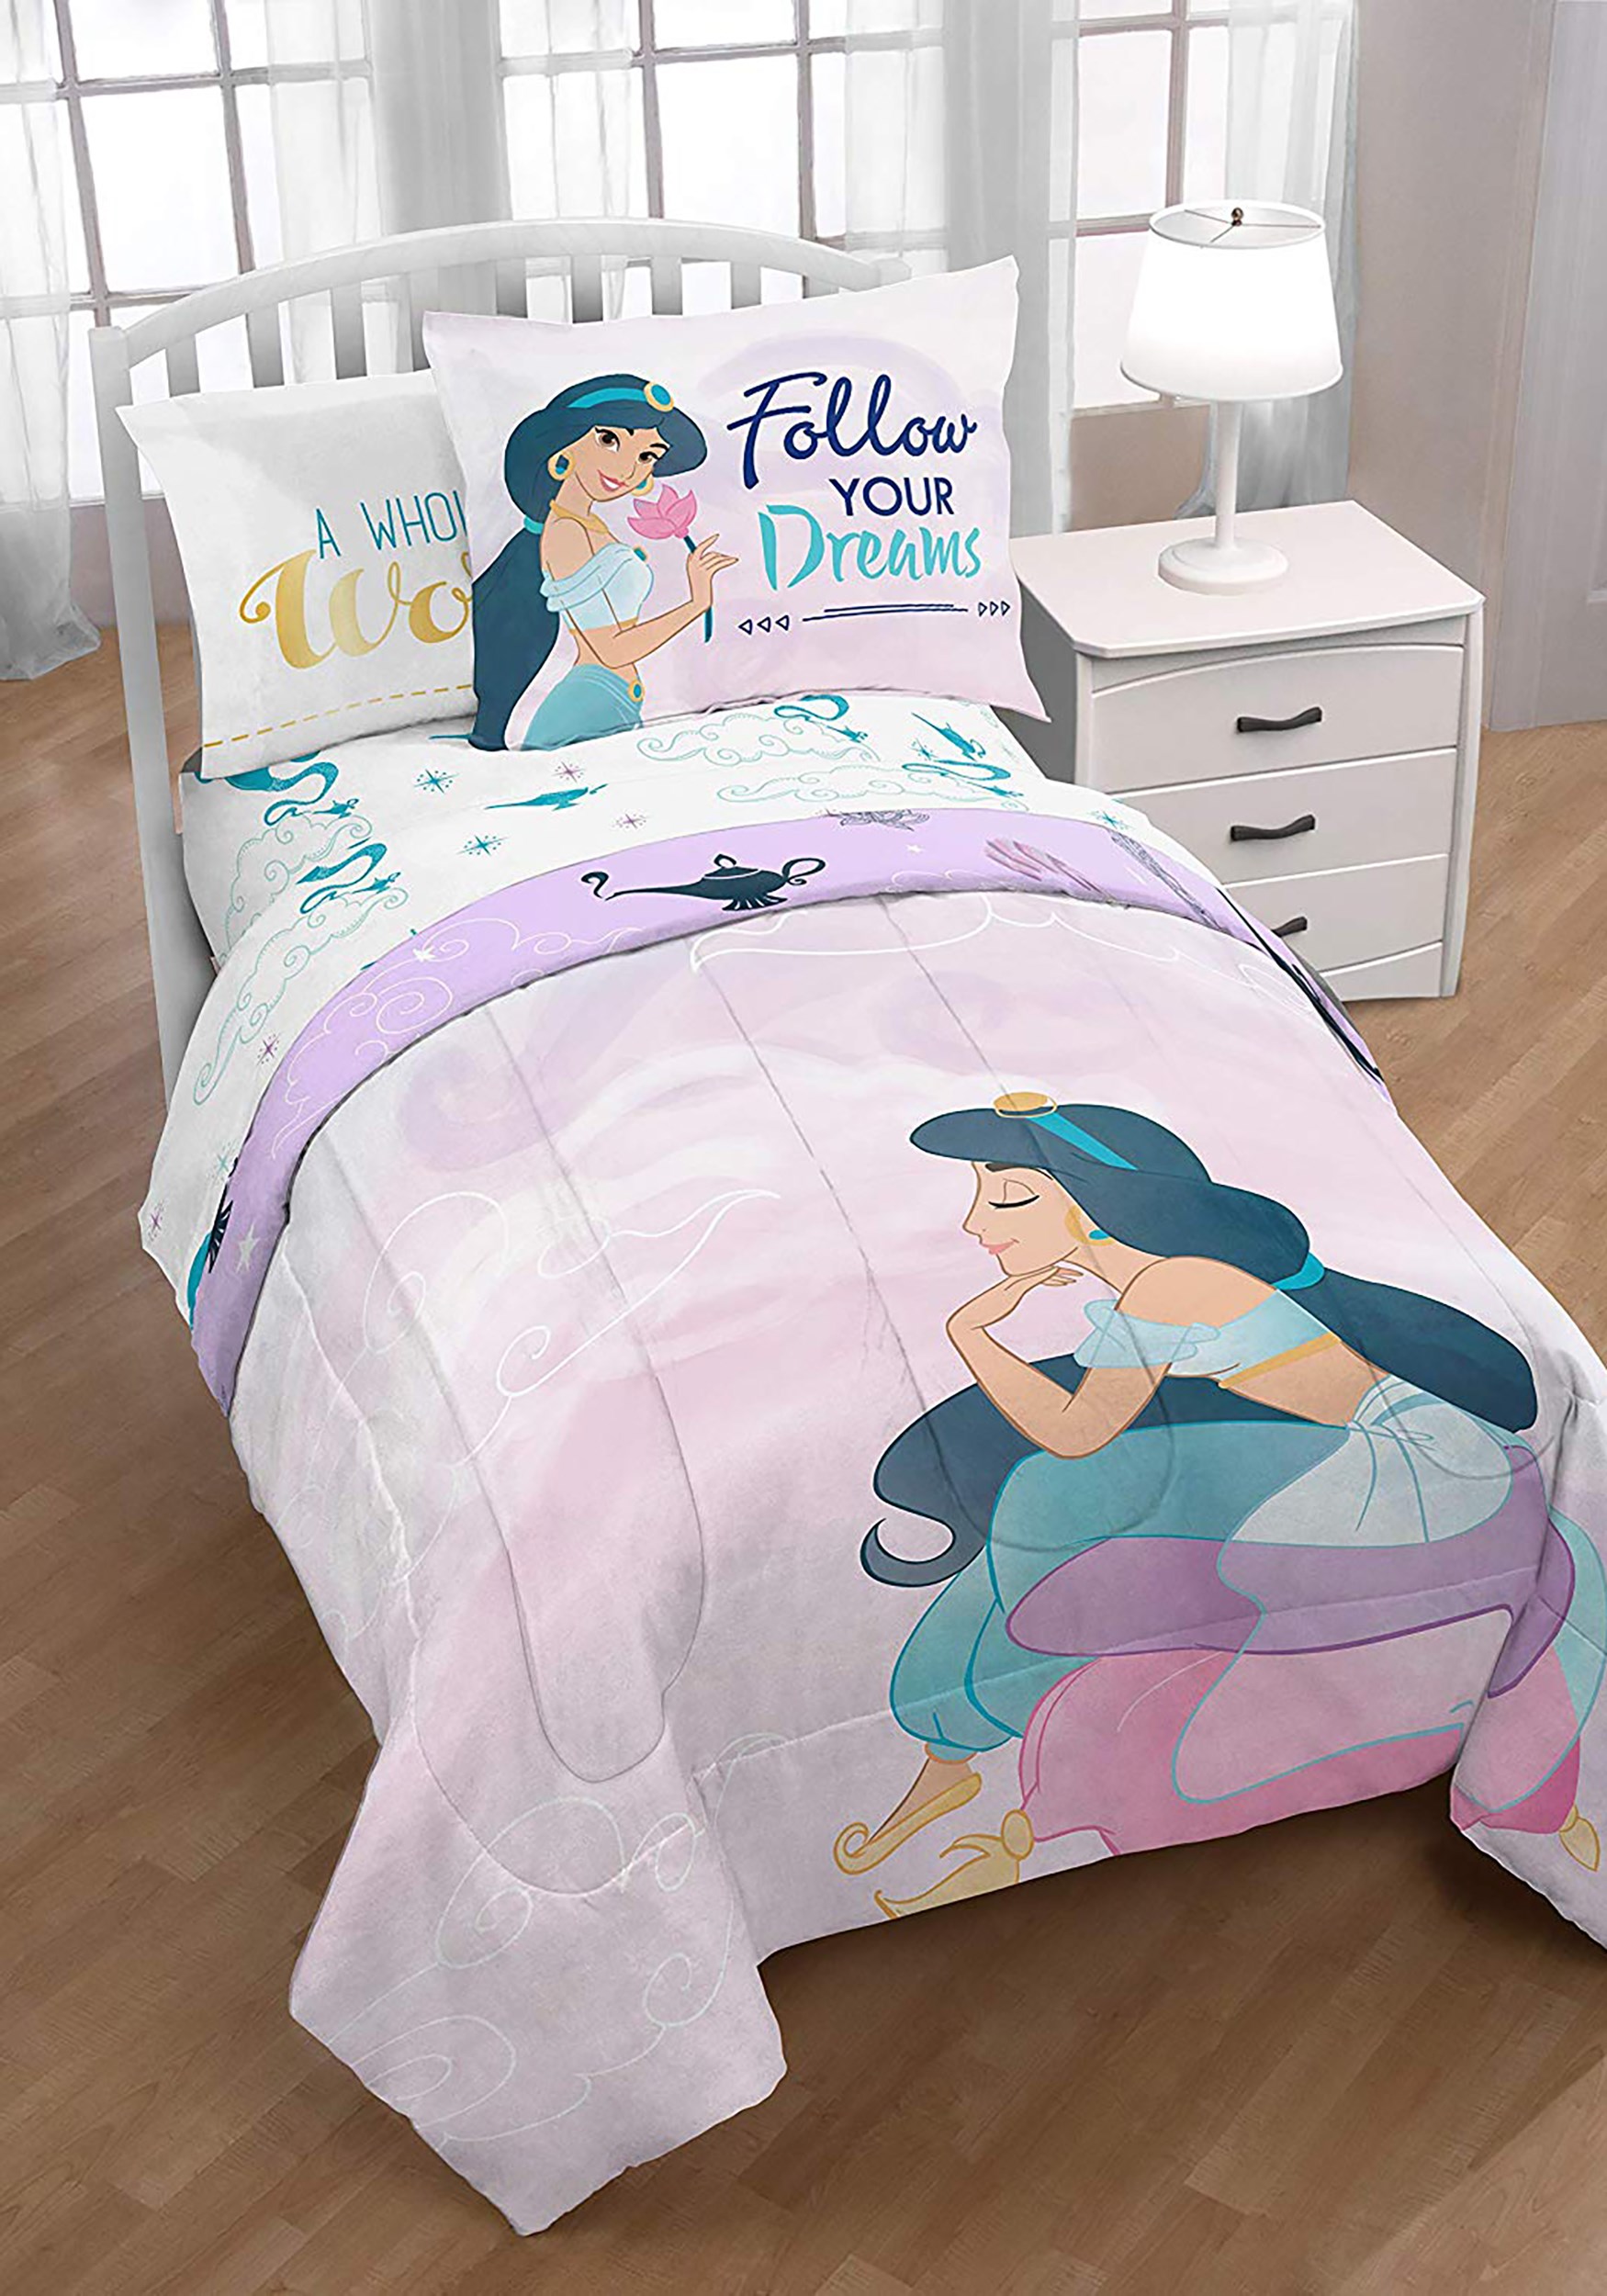 Disney Aladdin Dreams Twin Bed In A Bag, Power Ranger Twin Bed In A Bag